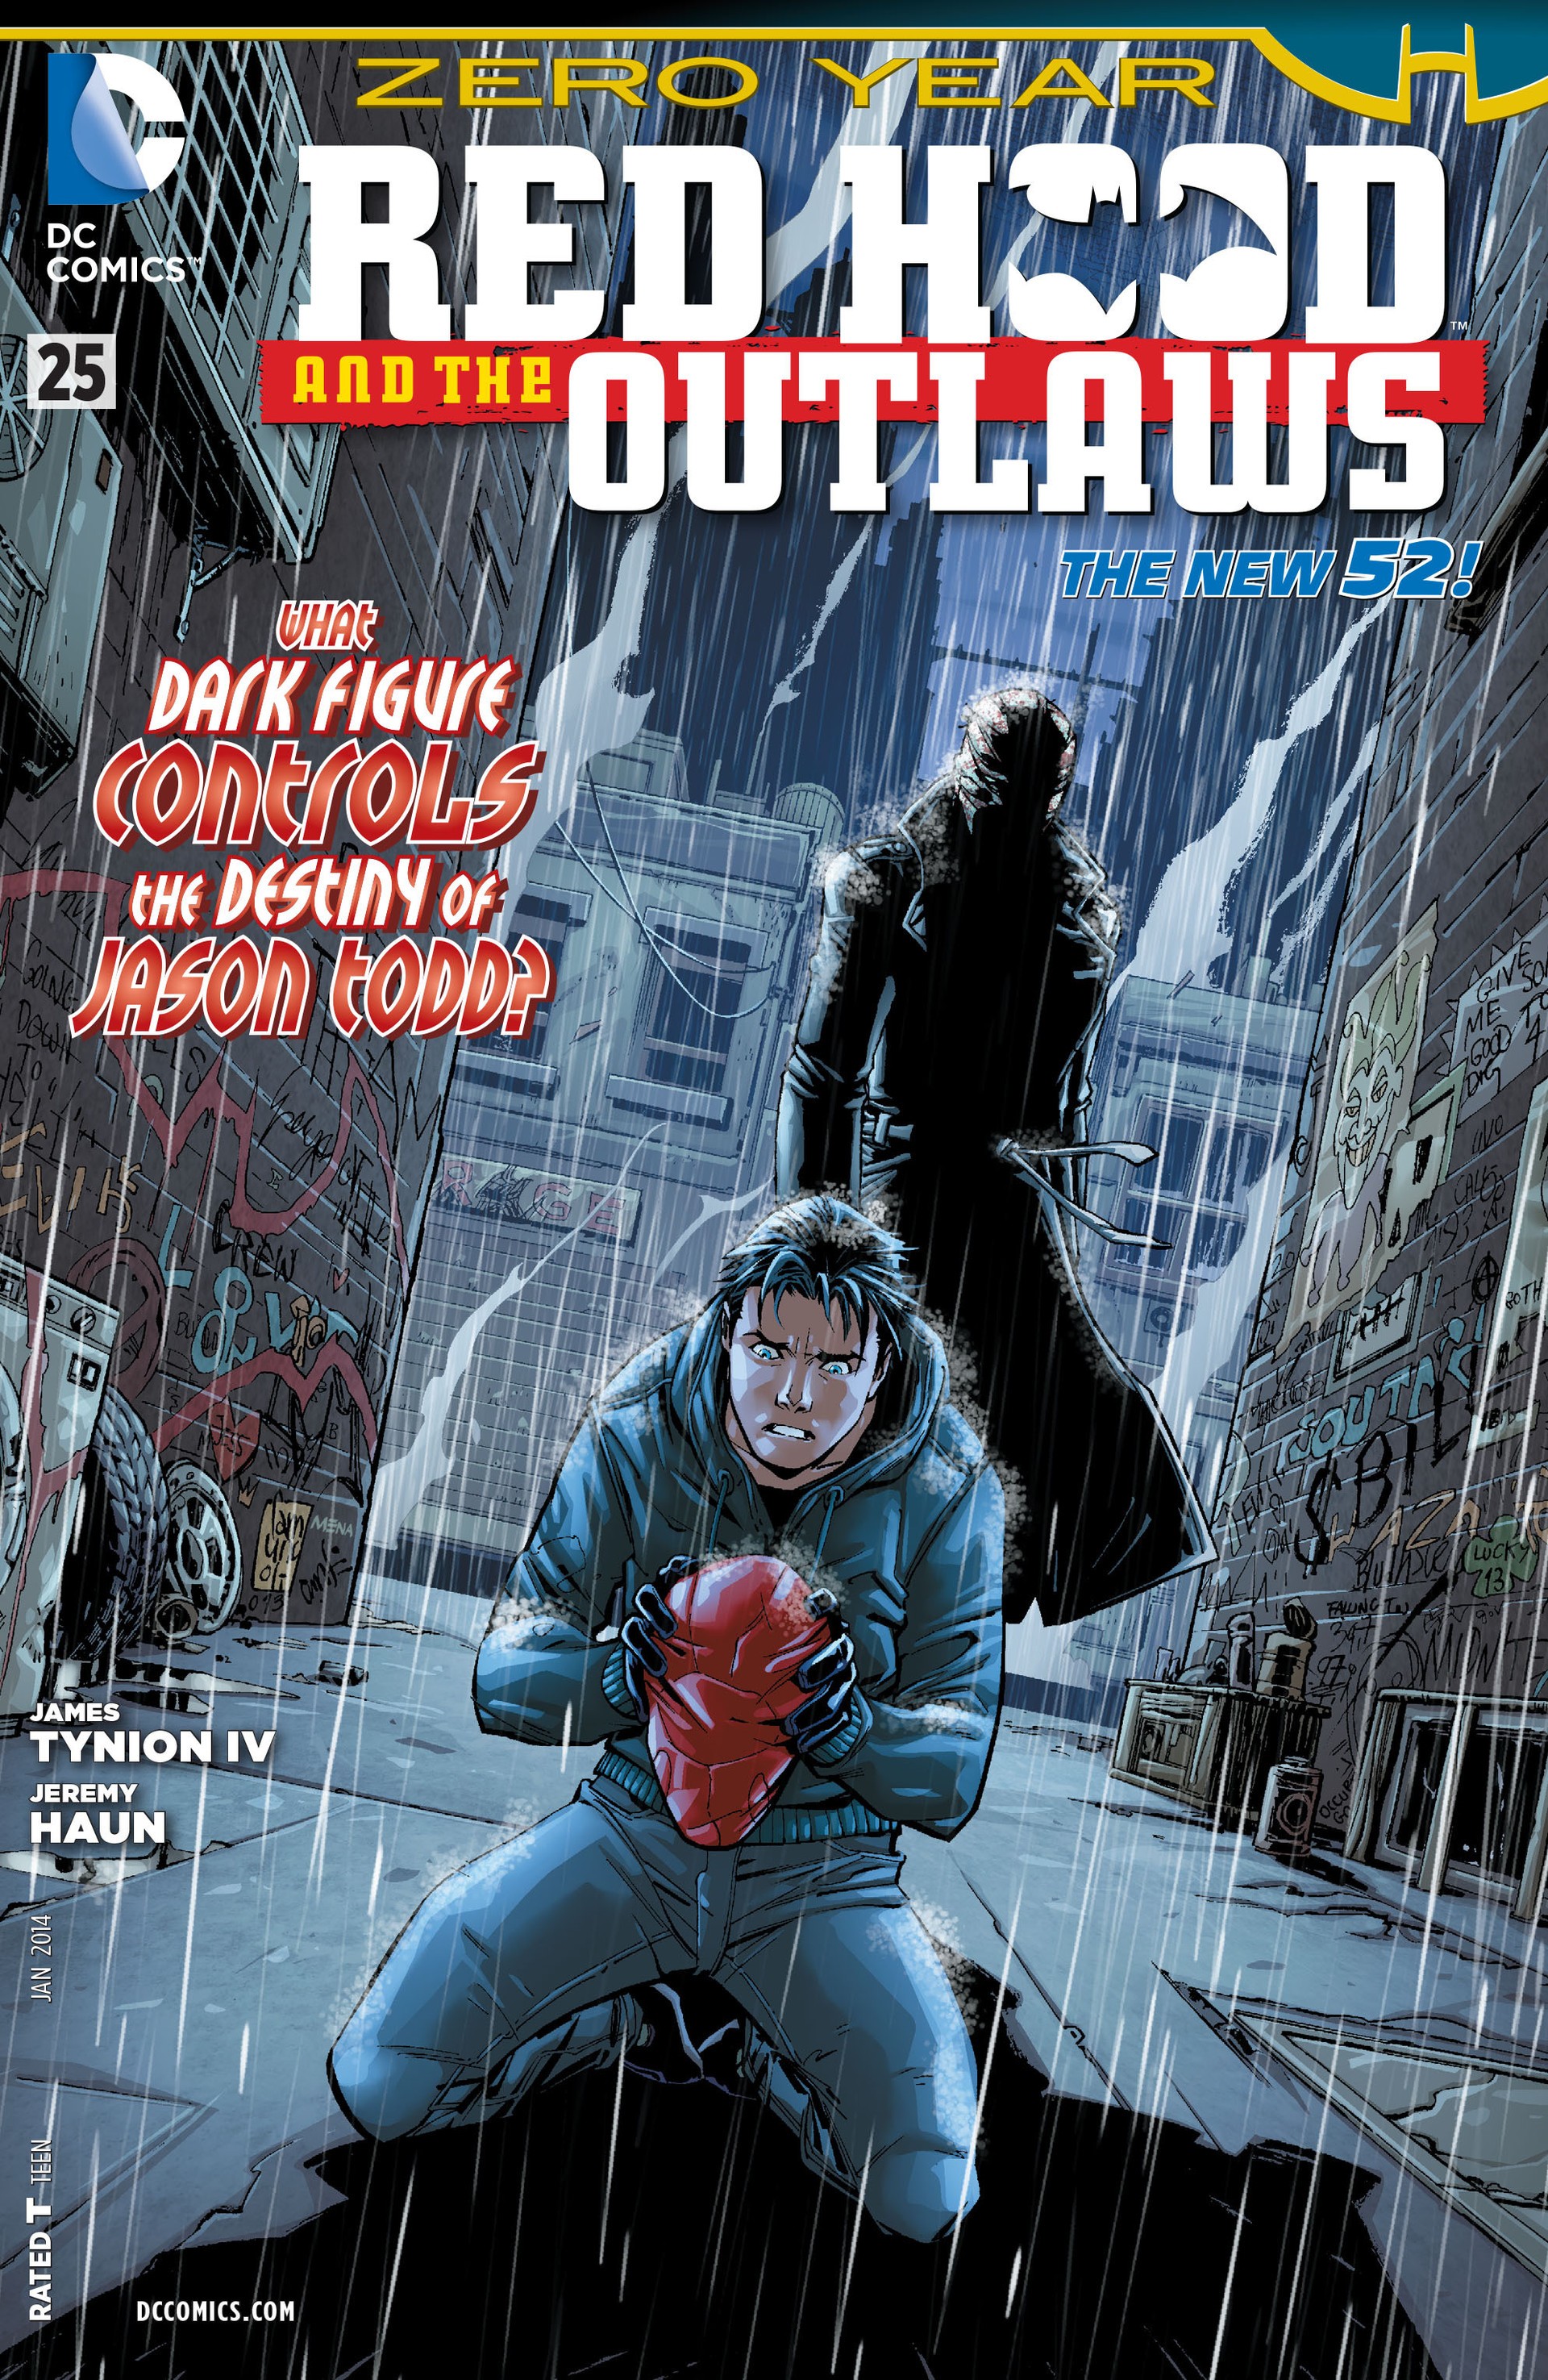 Red Hood and the Outlaws Vol. 1 #25